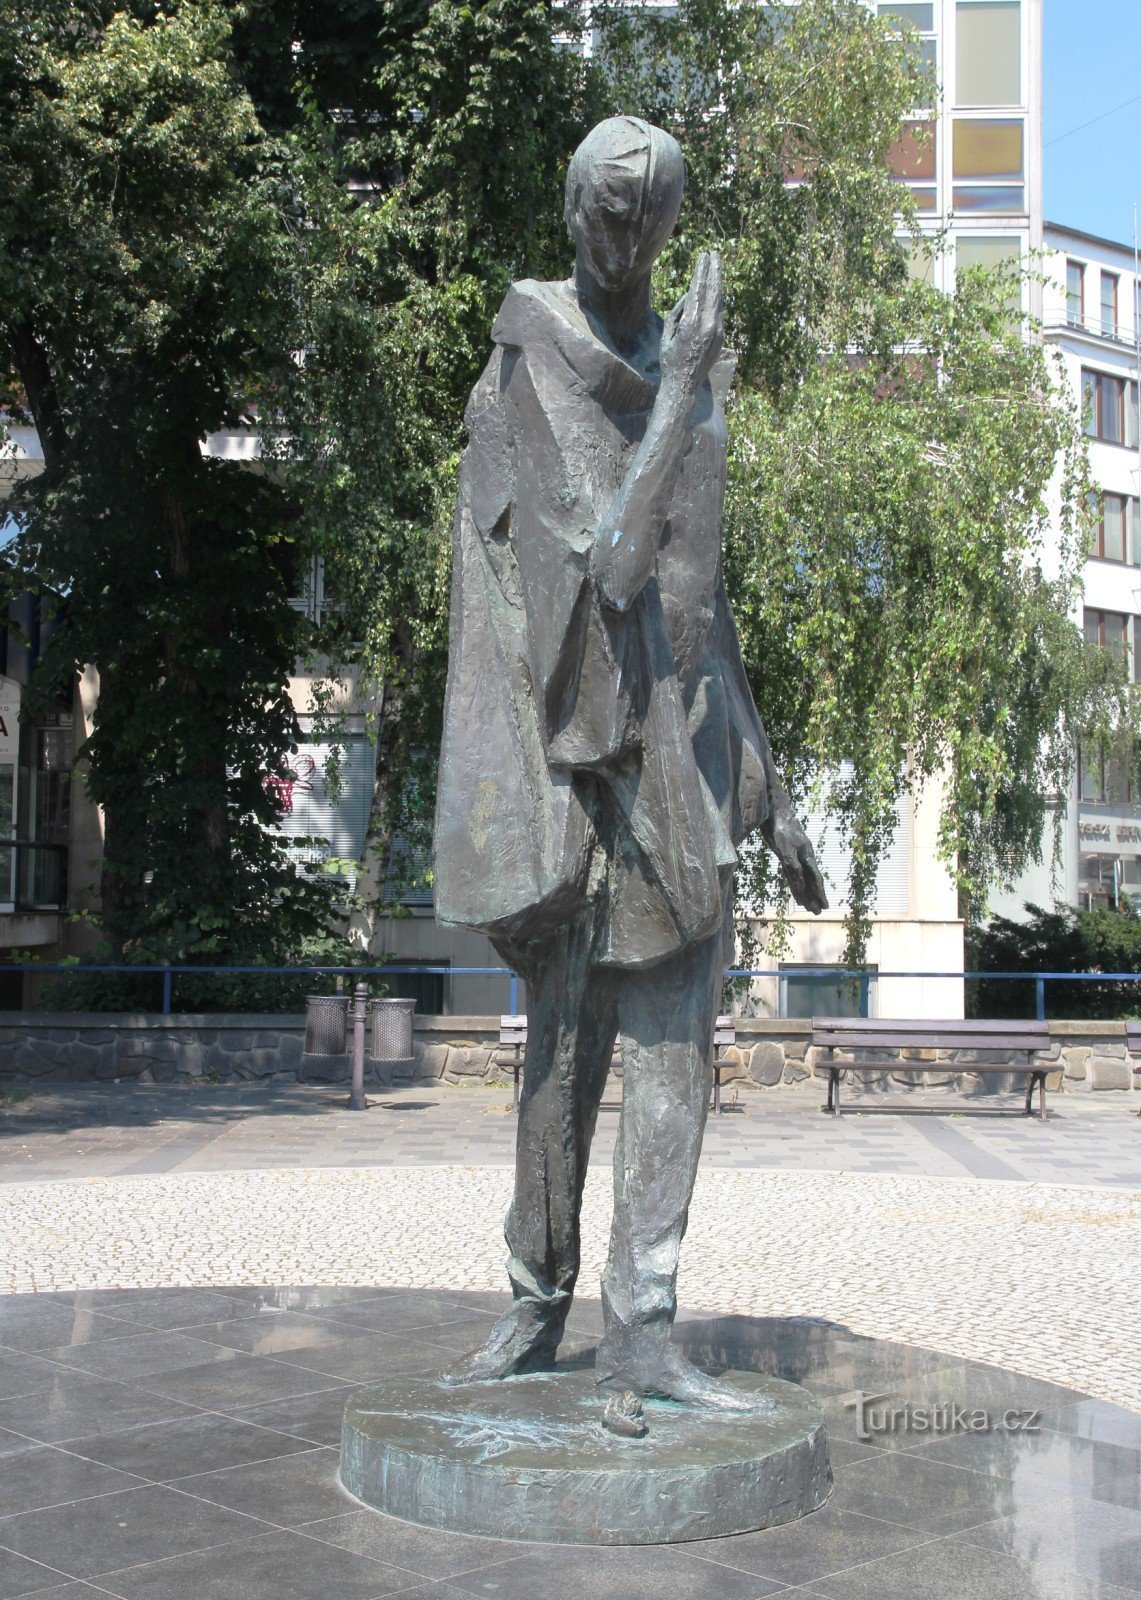 Mima statue by Jiří Marek in front of the White House building